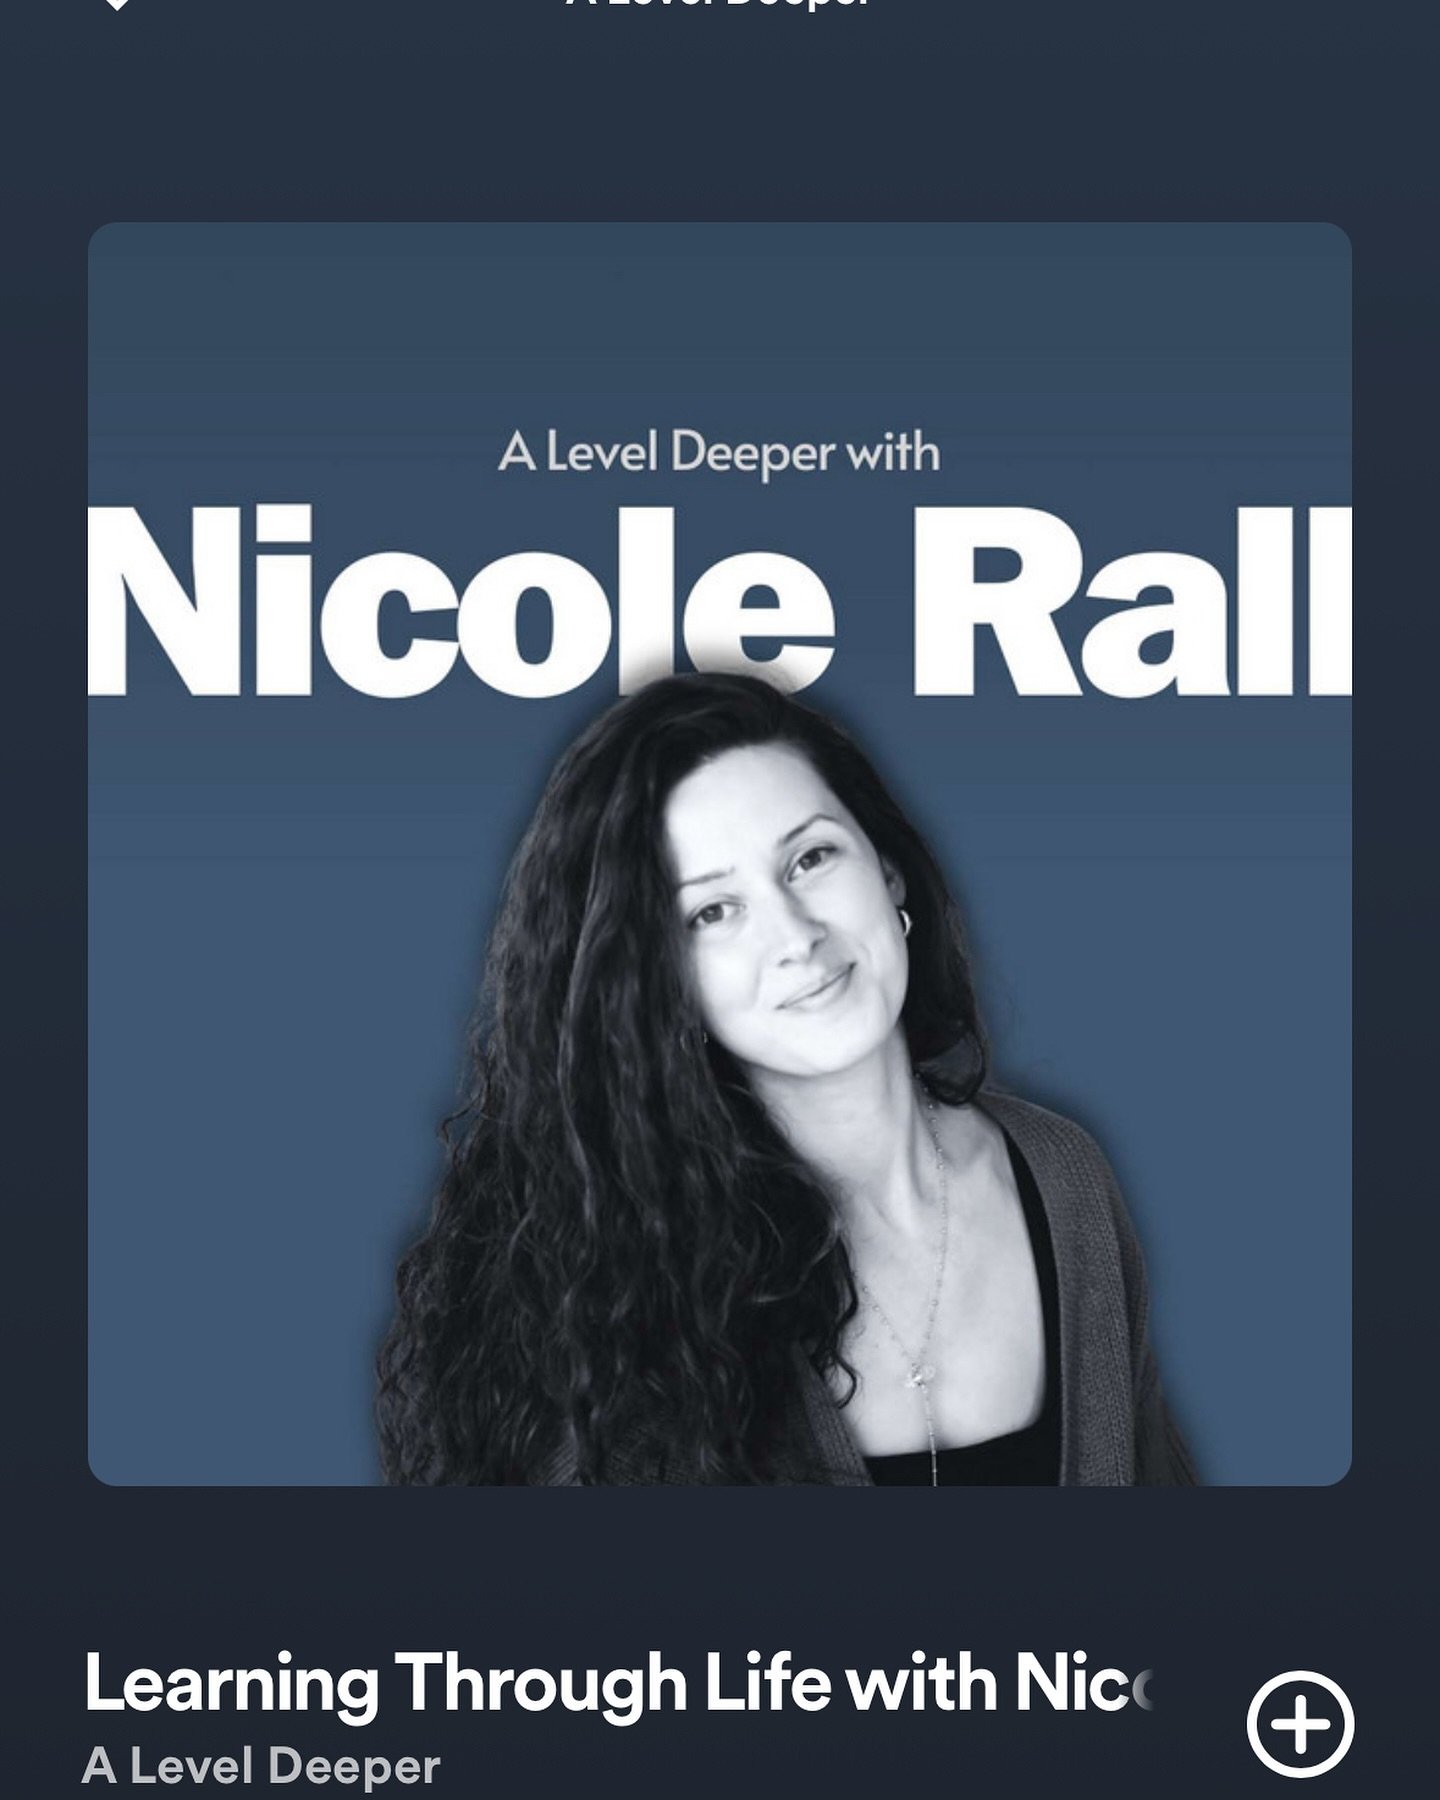 I was a guest on a podcast for the first time last week. 
Talk about nerves &amp; vulnerability. 
@chadmmiles the host of @aleveldeeper is such an incredible host. You can feel his genuine love of connection &amp; desire to learn and understand. I hi